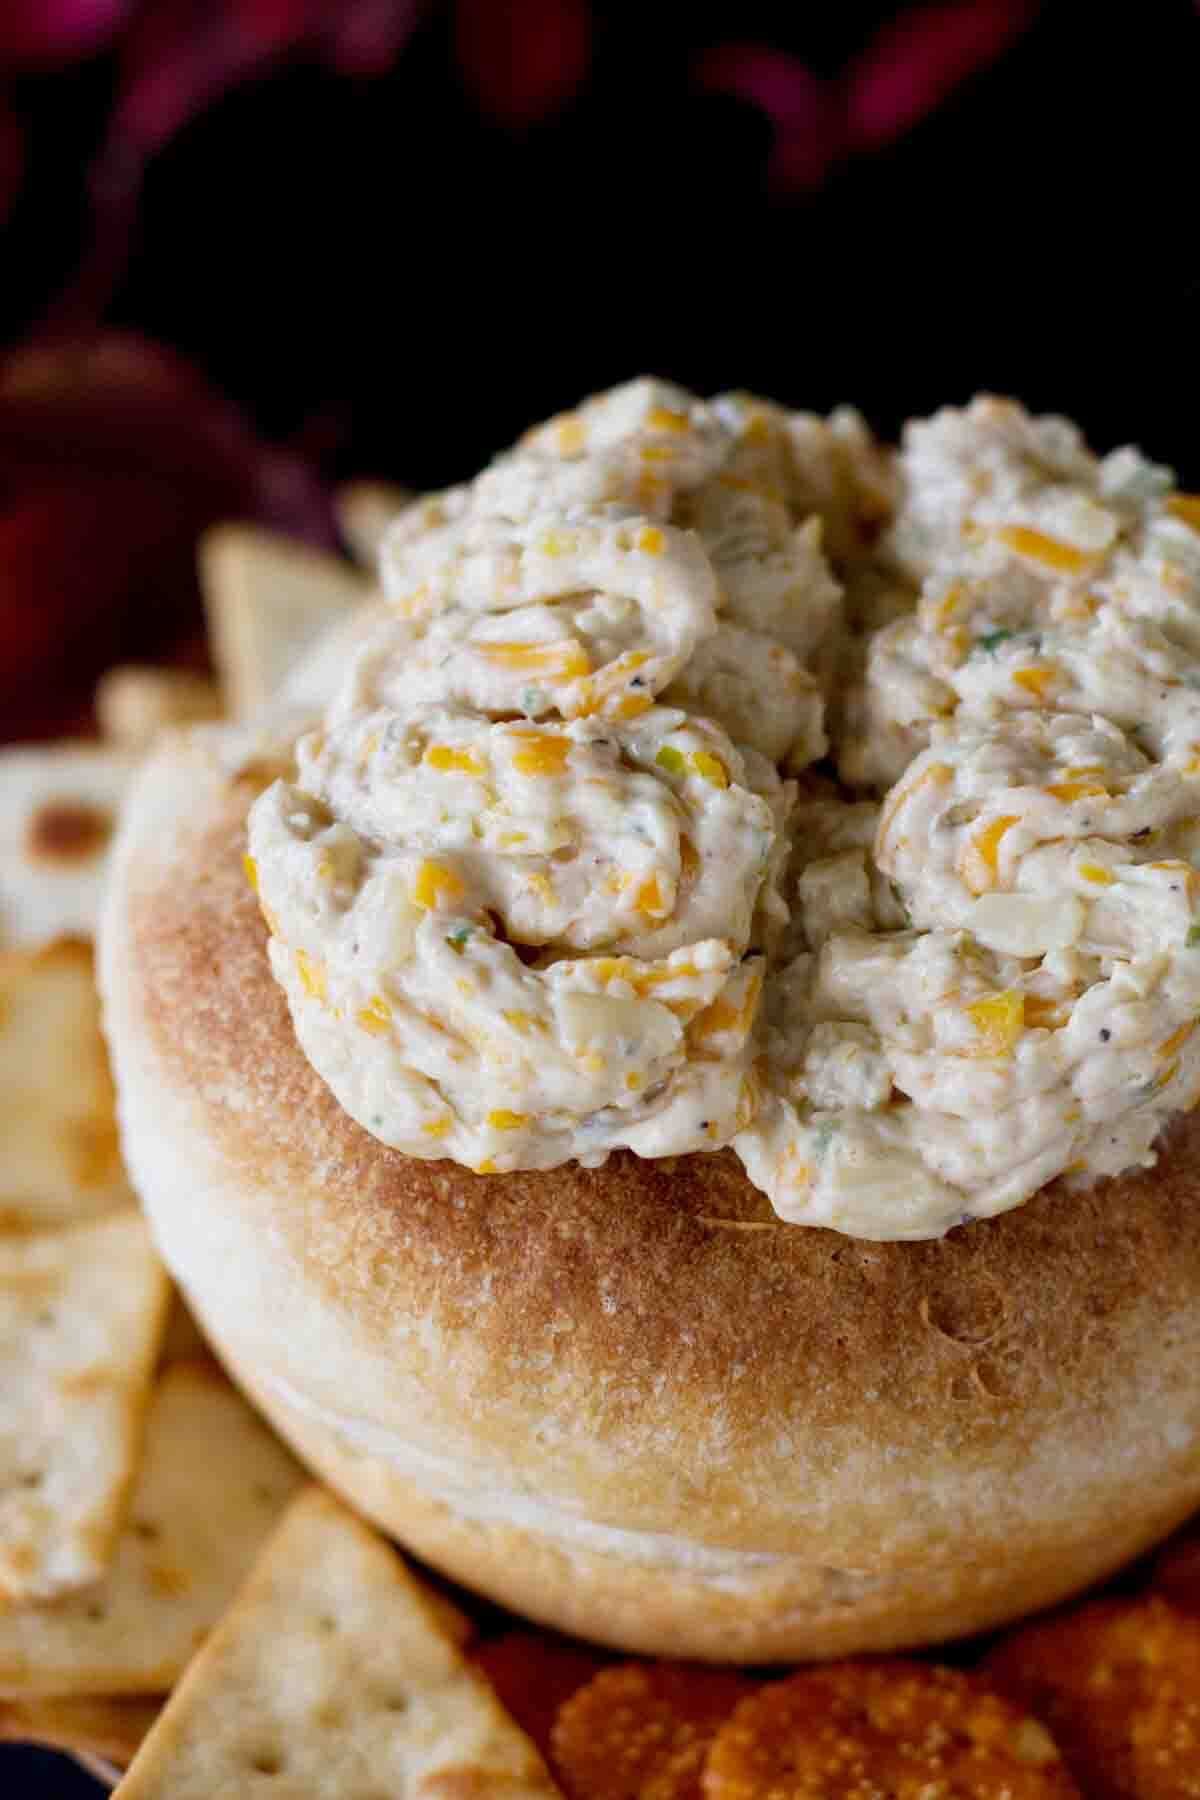 Cheese dip made to look like monster brains served in a bread bowl.